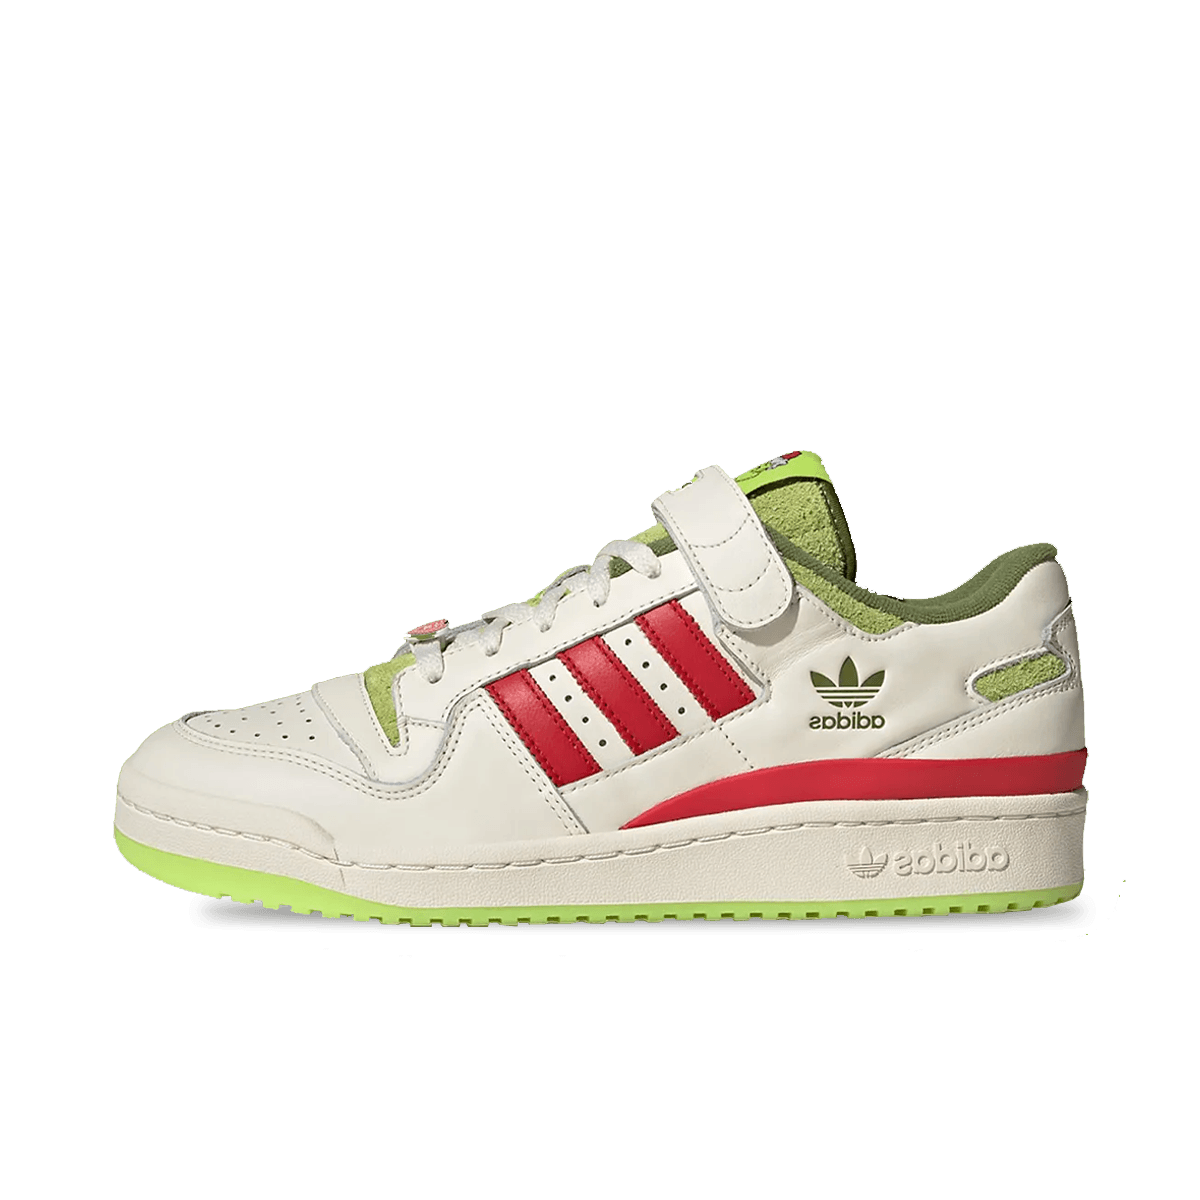 The Grinch x adidas Forum Low 'Cream Whiite' ID3512